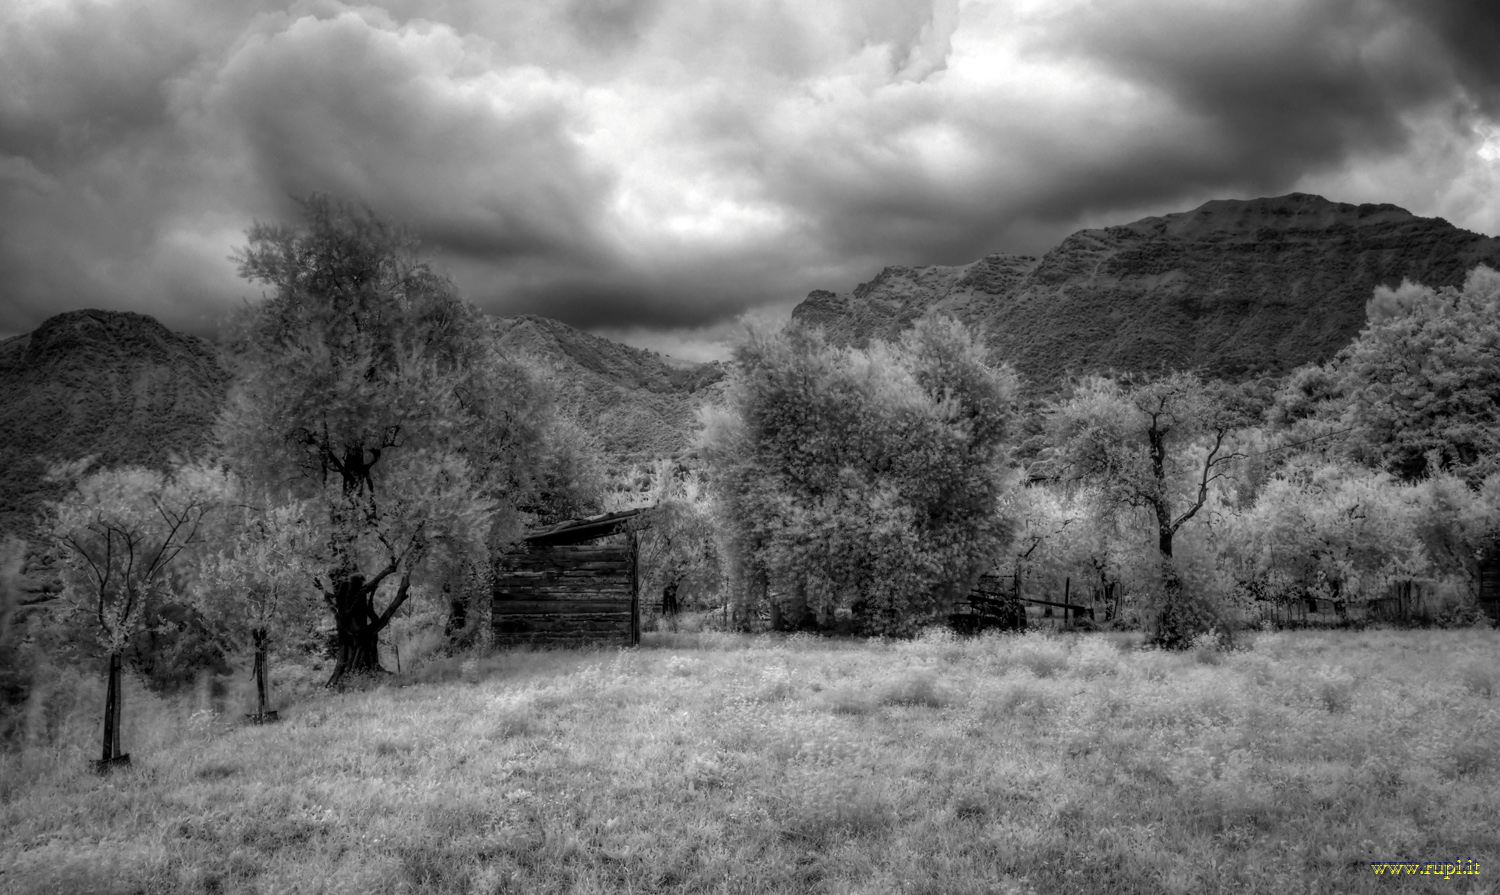 From parts of Maspiano 1 - IR...